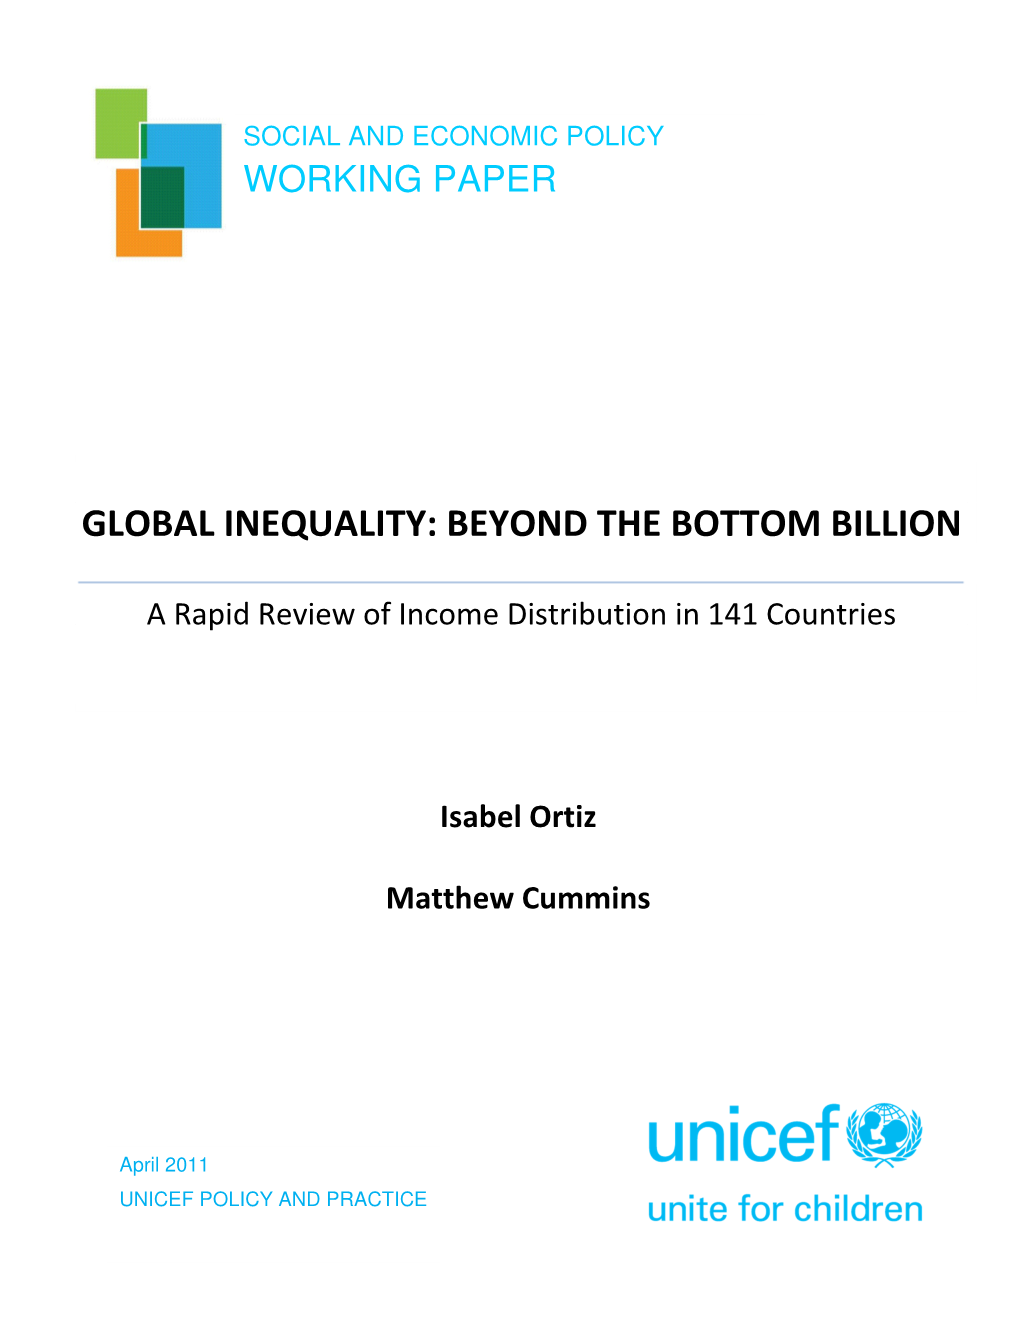 Global Inequality: Beyond the Bottom Billion-A Rapid Review of Income Distribution in 141 Countries